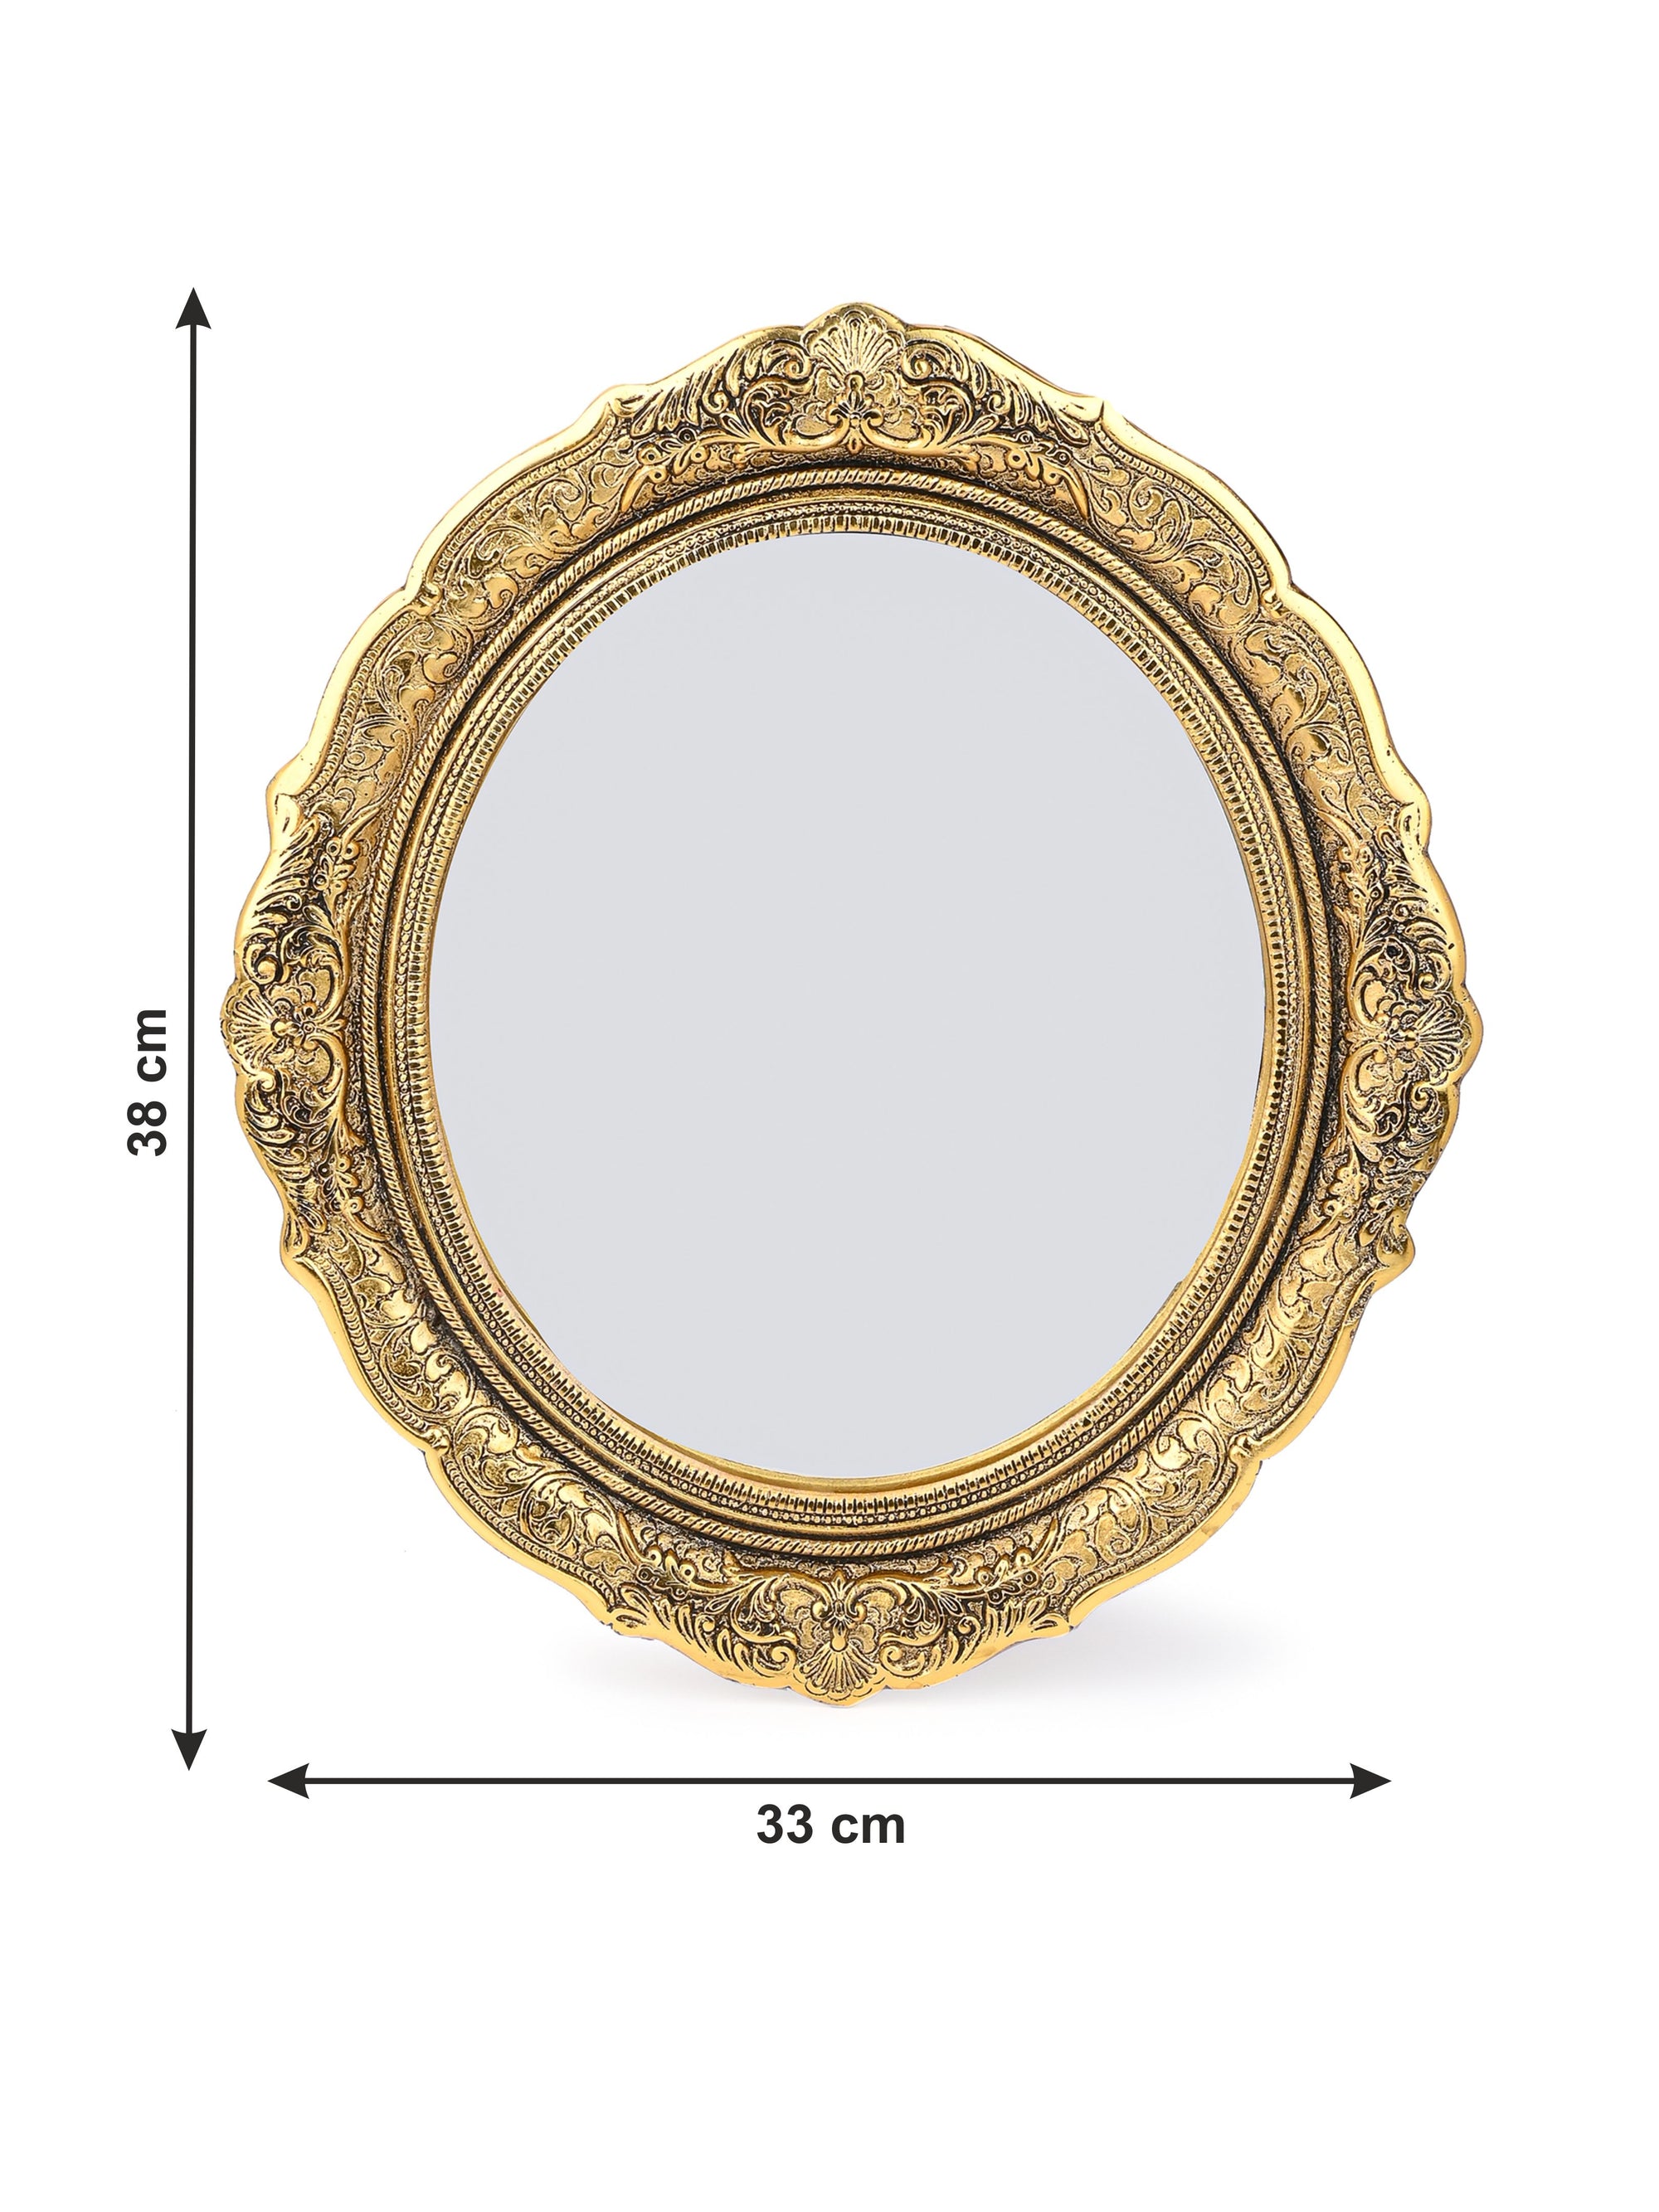 Hand Crafted Antique Gold Oval Wall Mirror - 15 inches